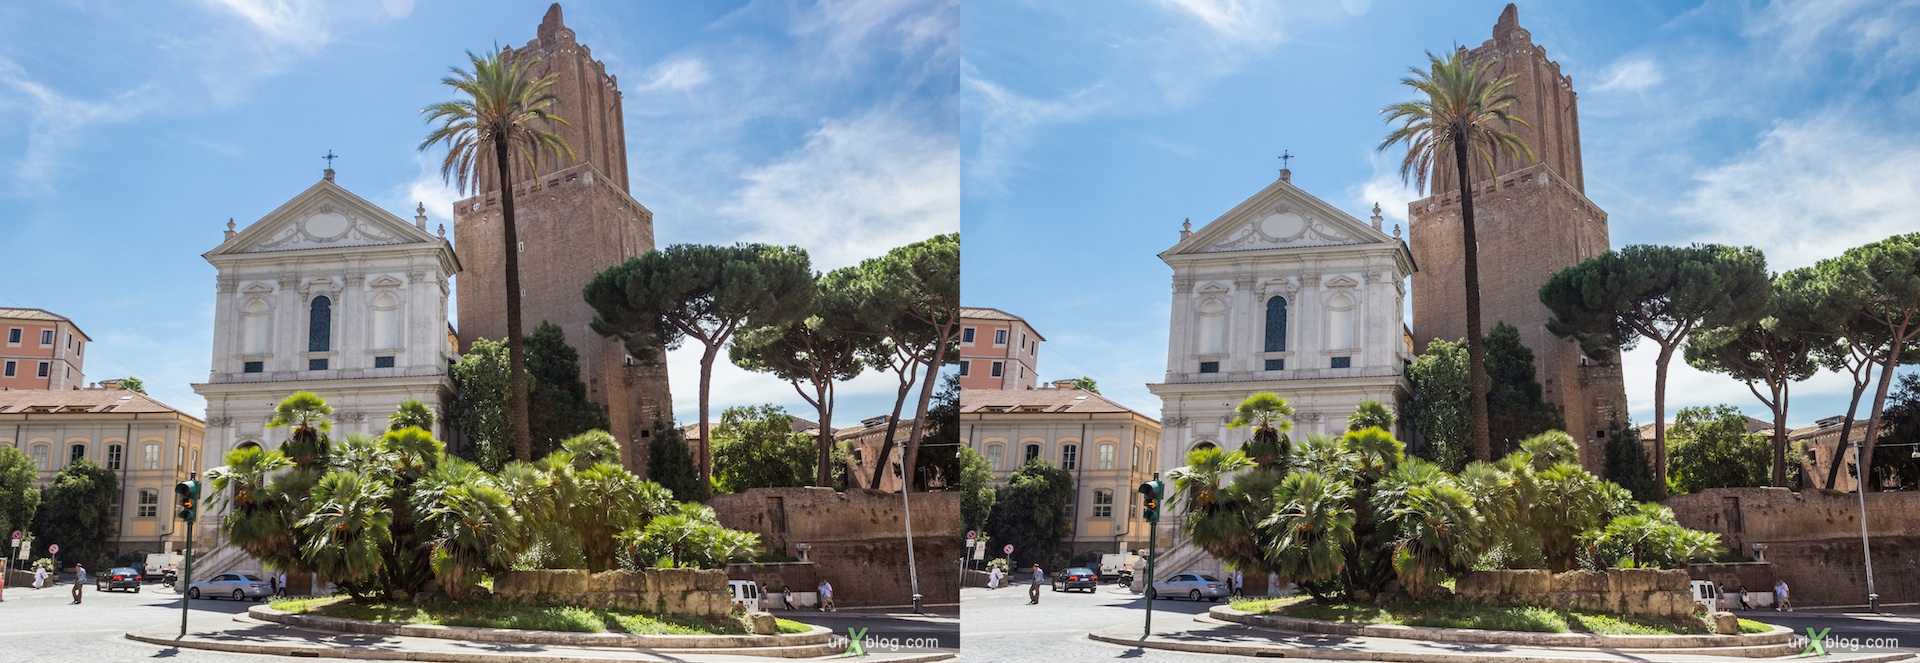 2012, Largo Magnanapoli square, Rome, Italy, Europe, 3D, stereo pair, cross-eyed, crossview, cross view stereo pair